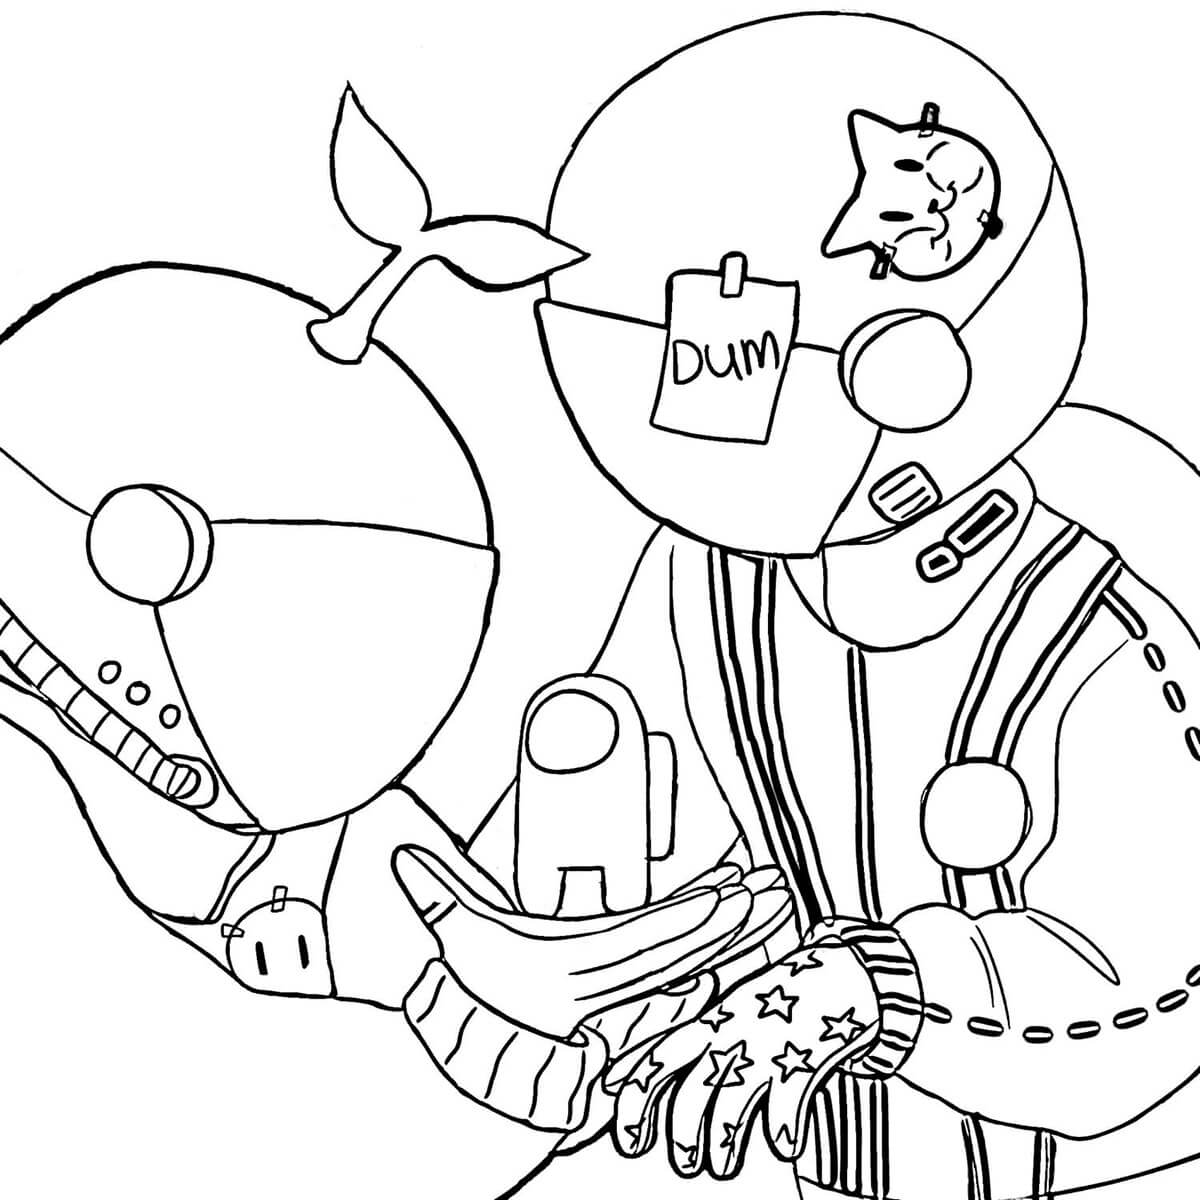 Among Us Coloring Pages Free Printable Coloring Pages for Kids